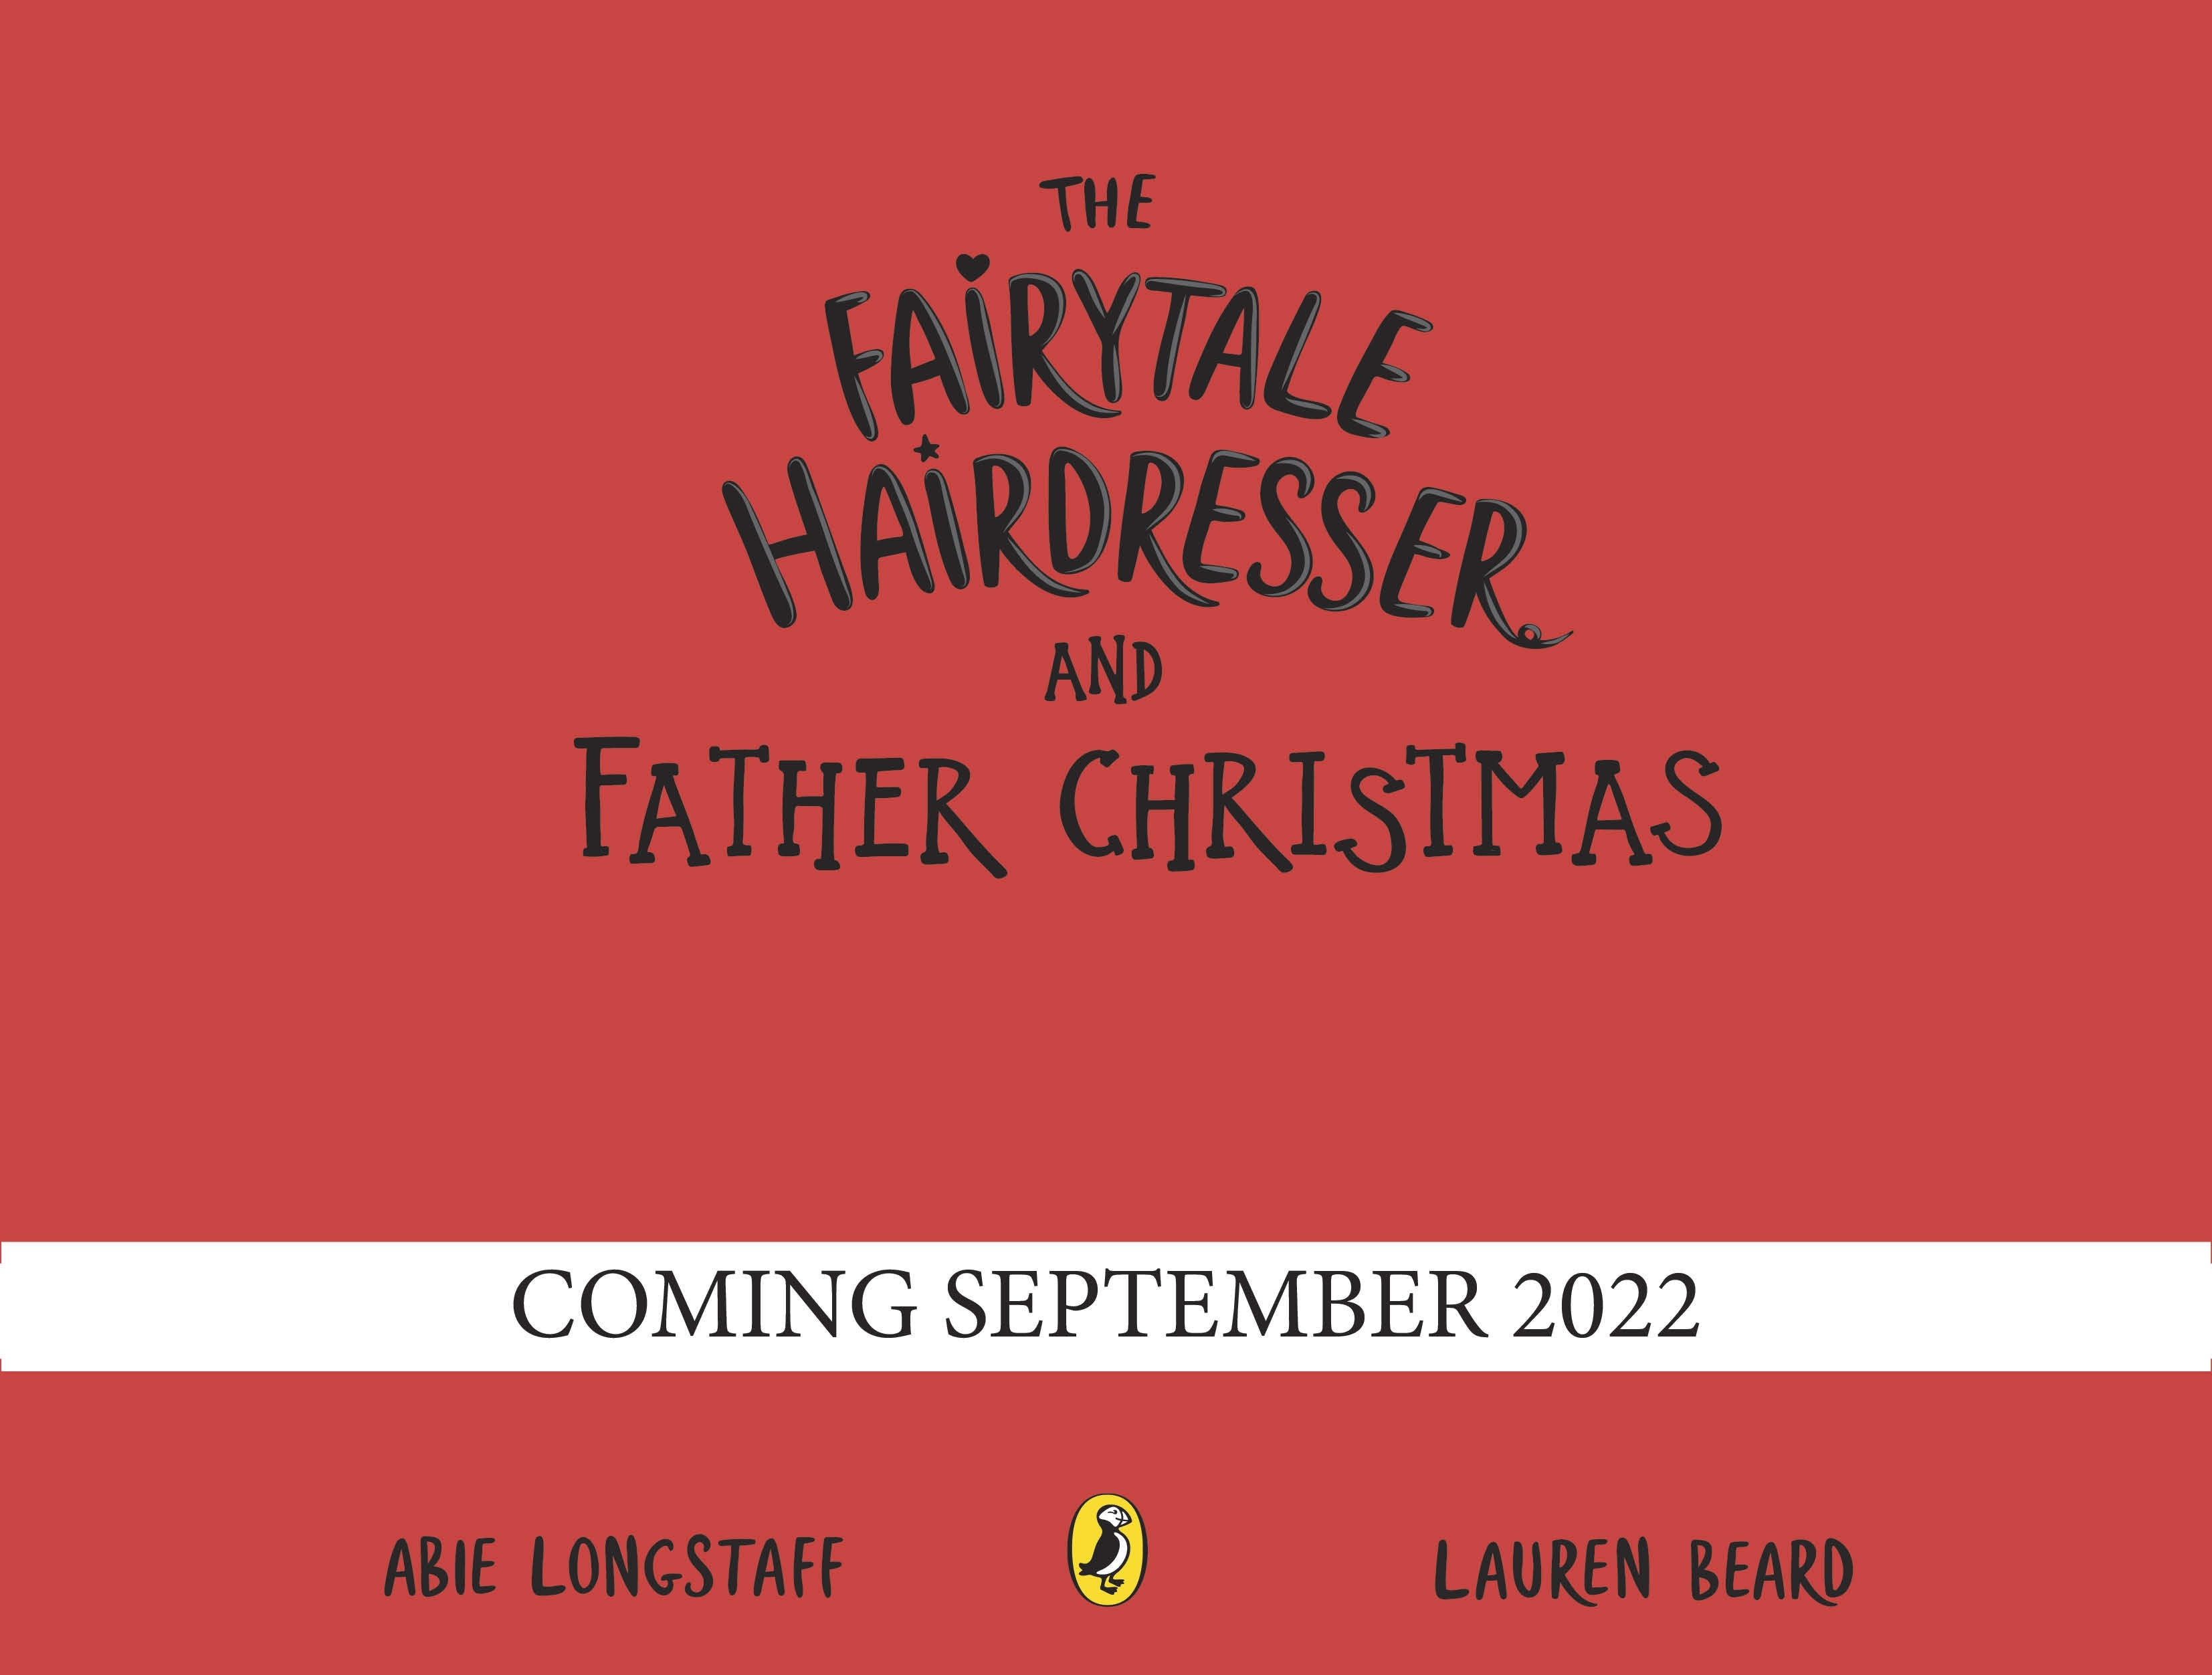 Book “The Fairytale Hairdresser and Father Christmas” by Abie Longstaff — September 29, 2022